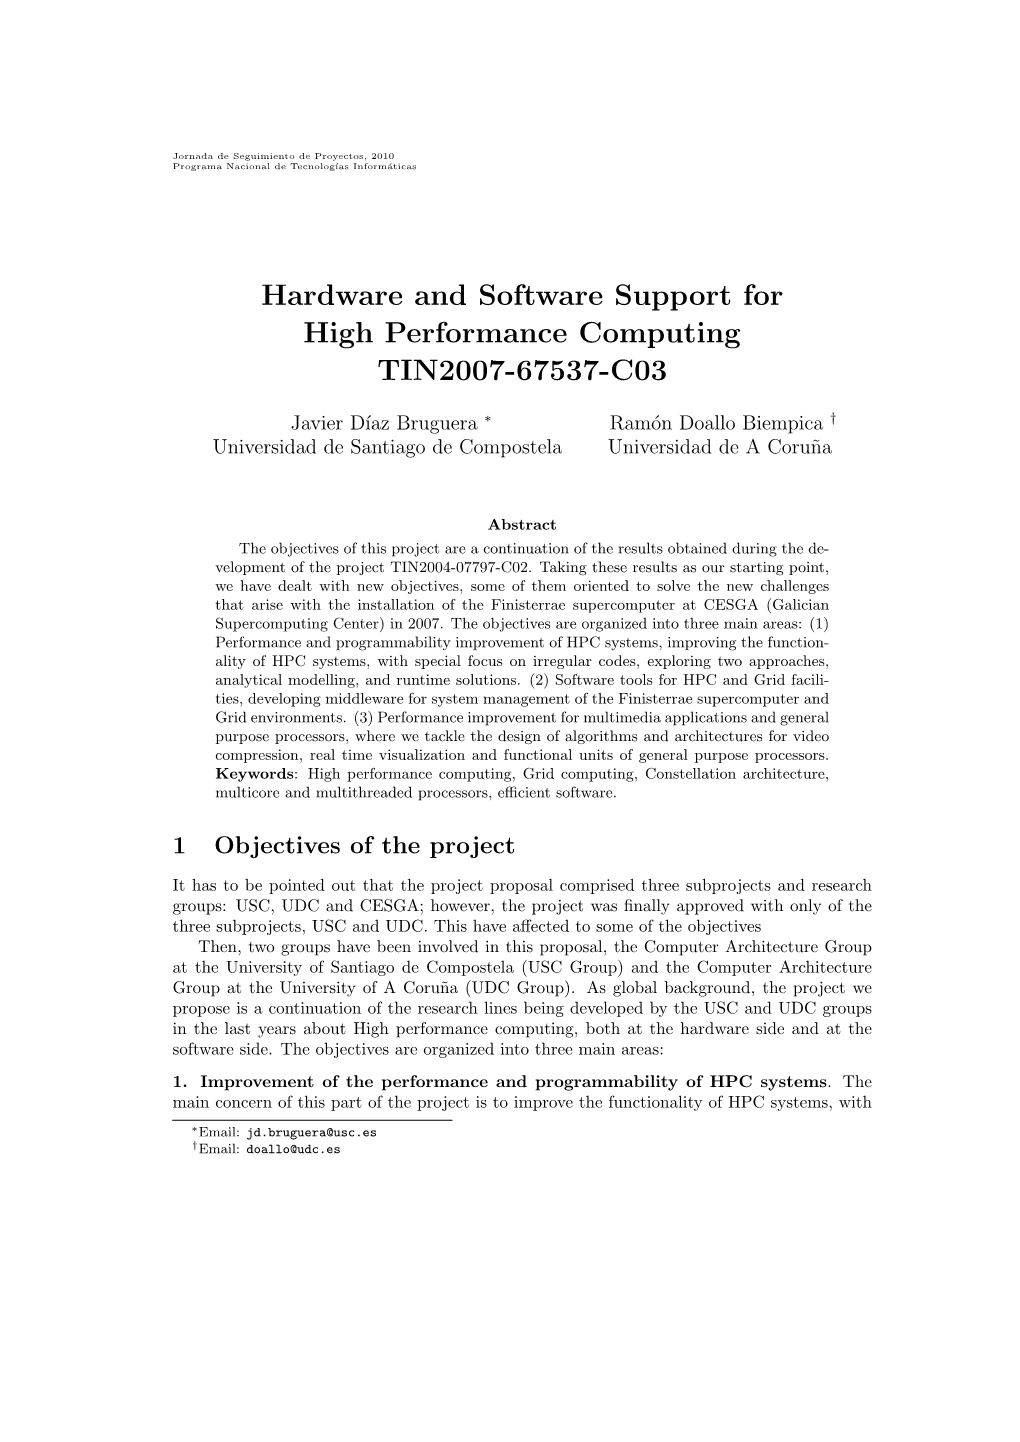 Hardware and Software Support for High Performance Computing TIN2007-67537-C03